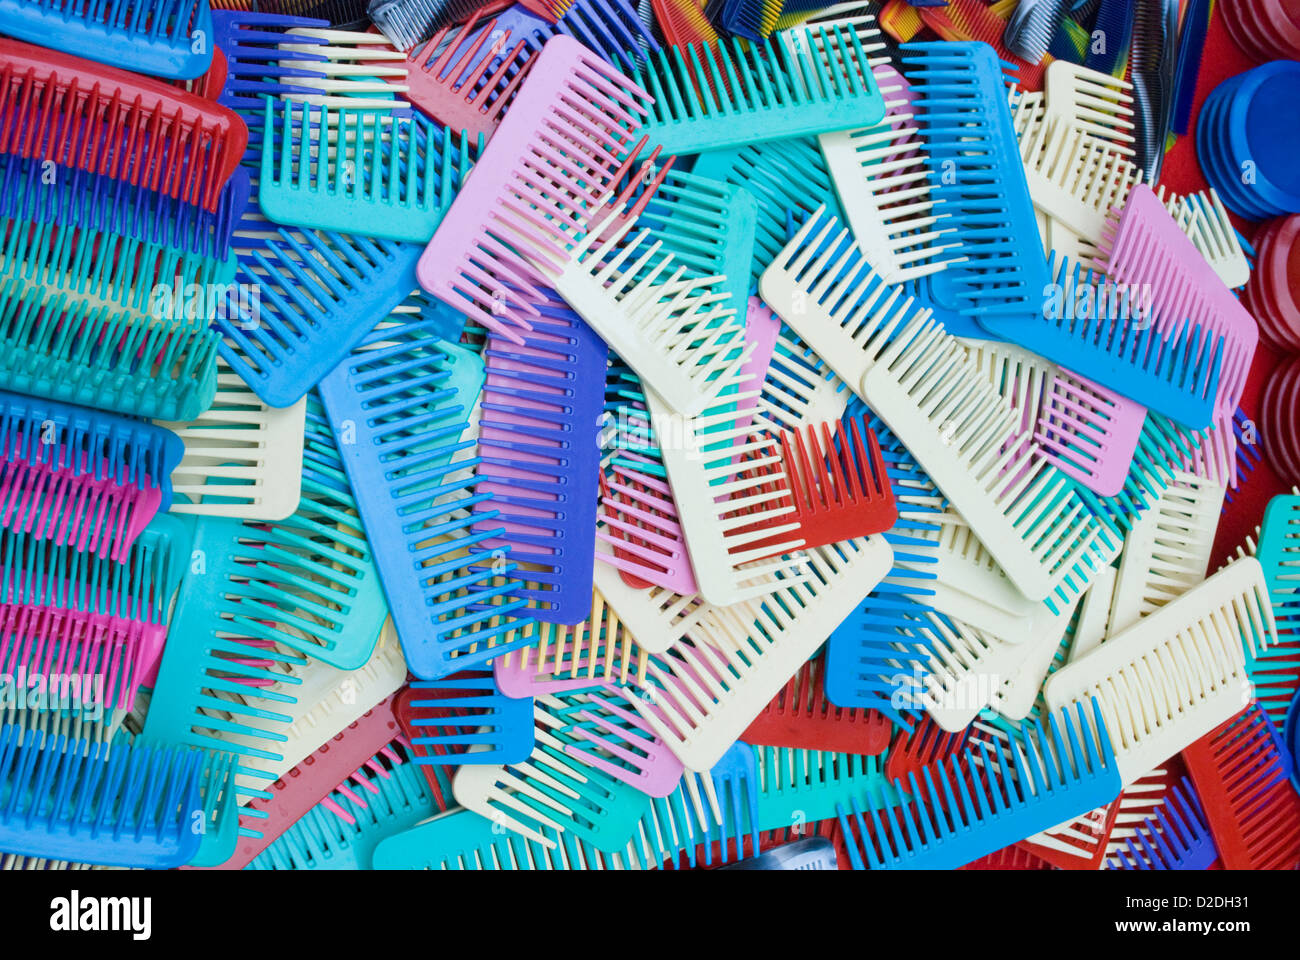 Colourful hair combs on sale in market Stock Photo